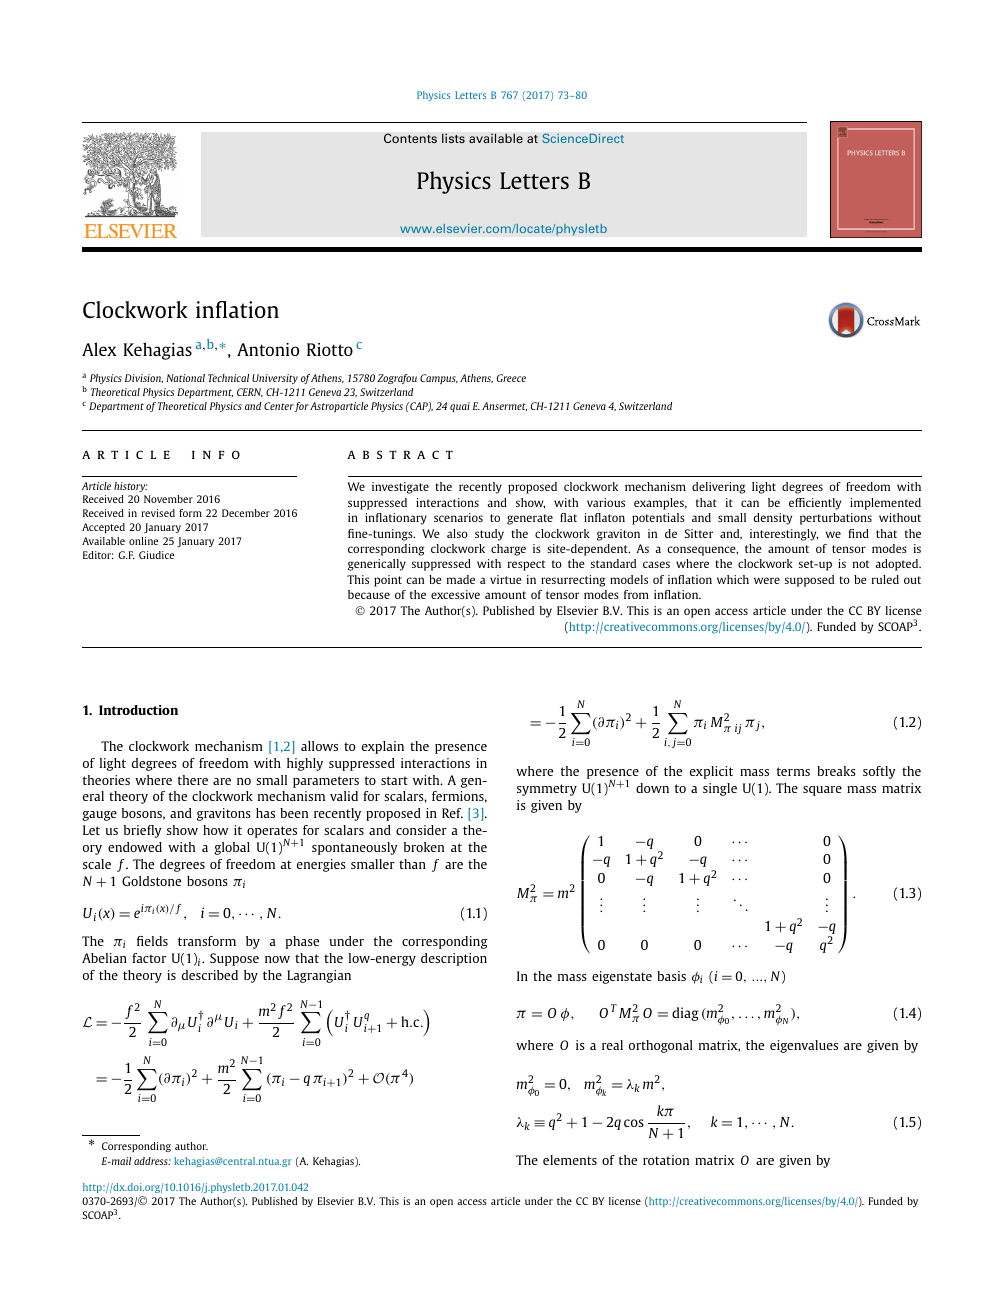 Clockwork Inflation Topic Of Research Paper In Physical Sciences Download Scholarly Article Pdf And Read For Free On Cyberleninka Open Science Hub